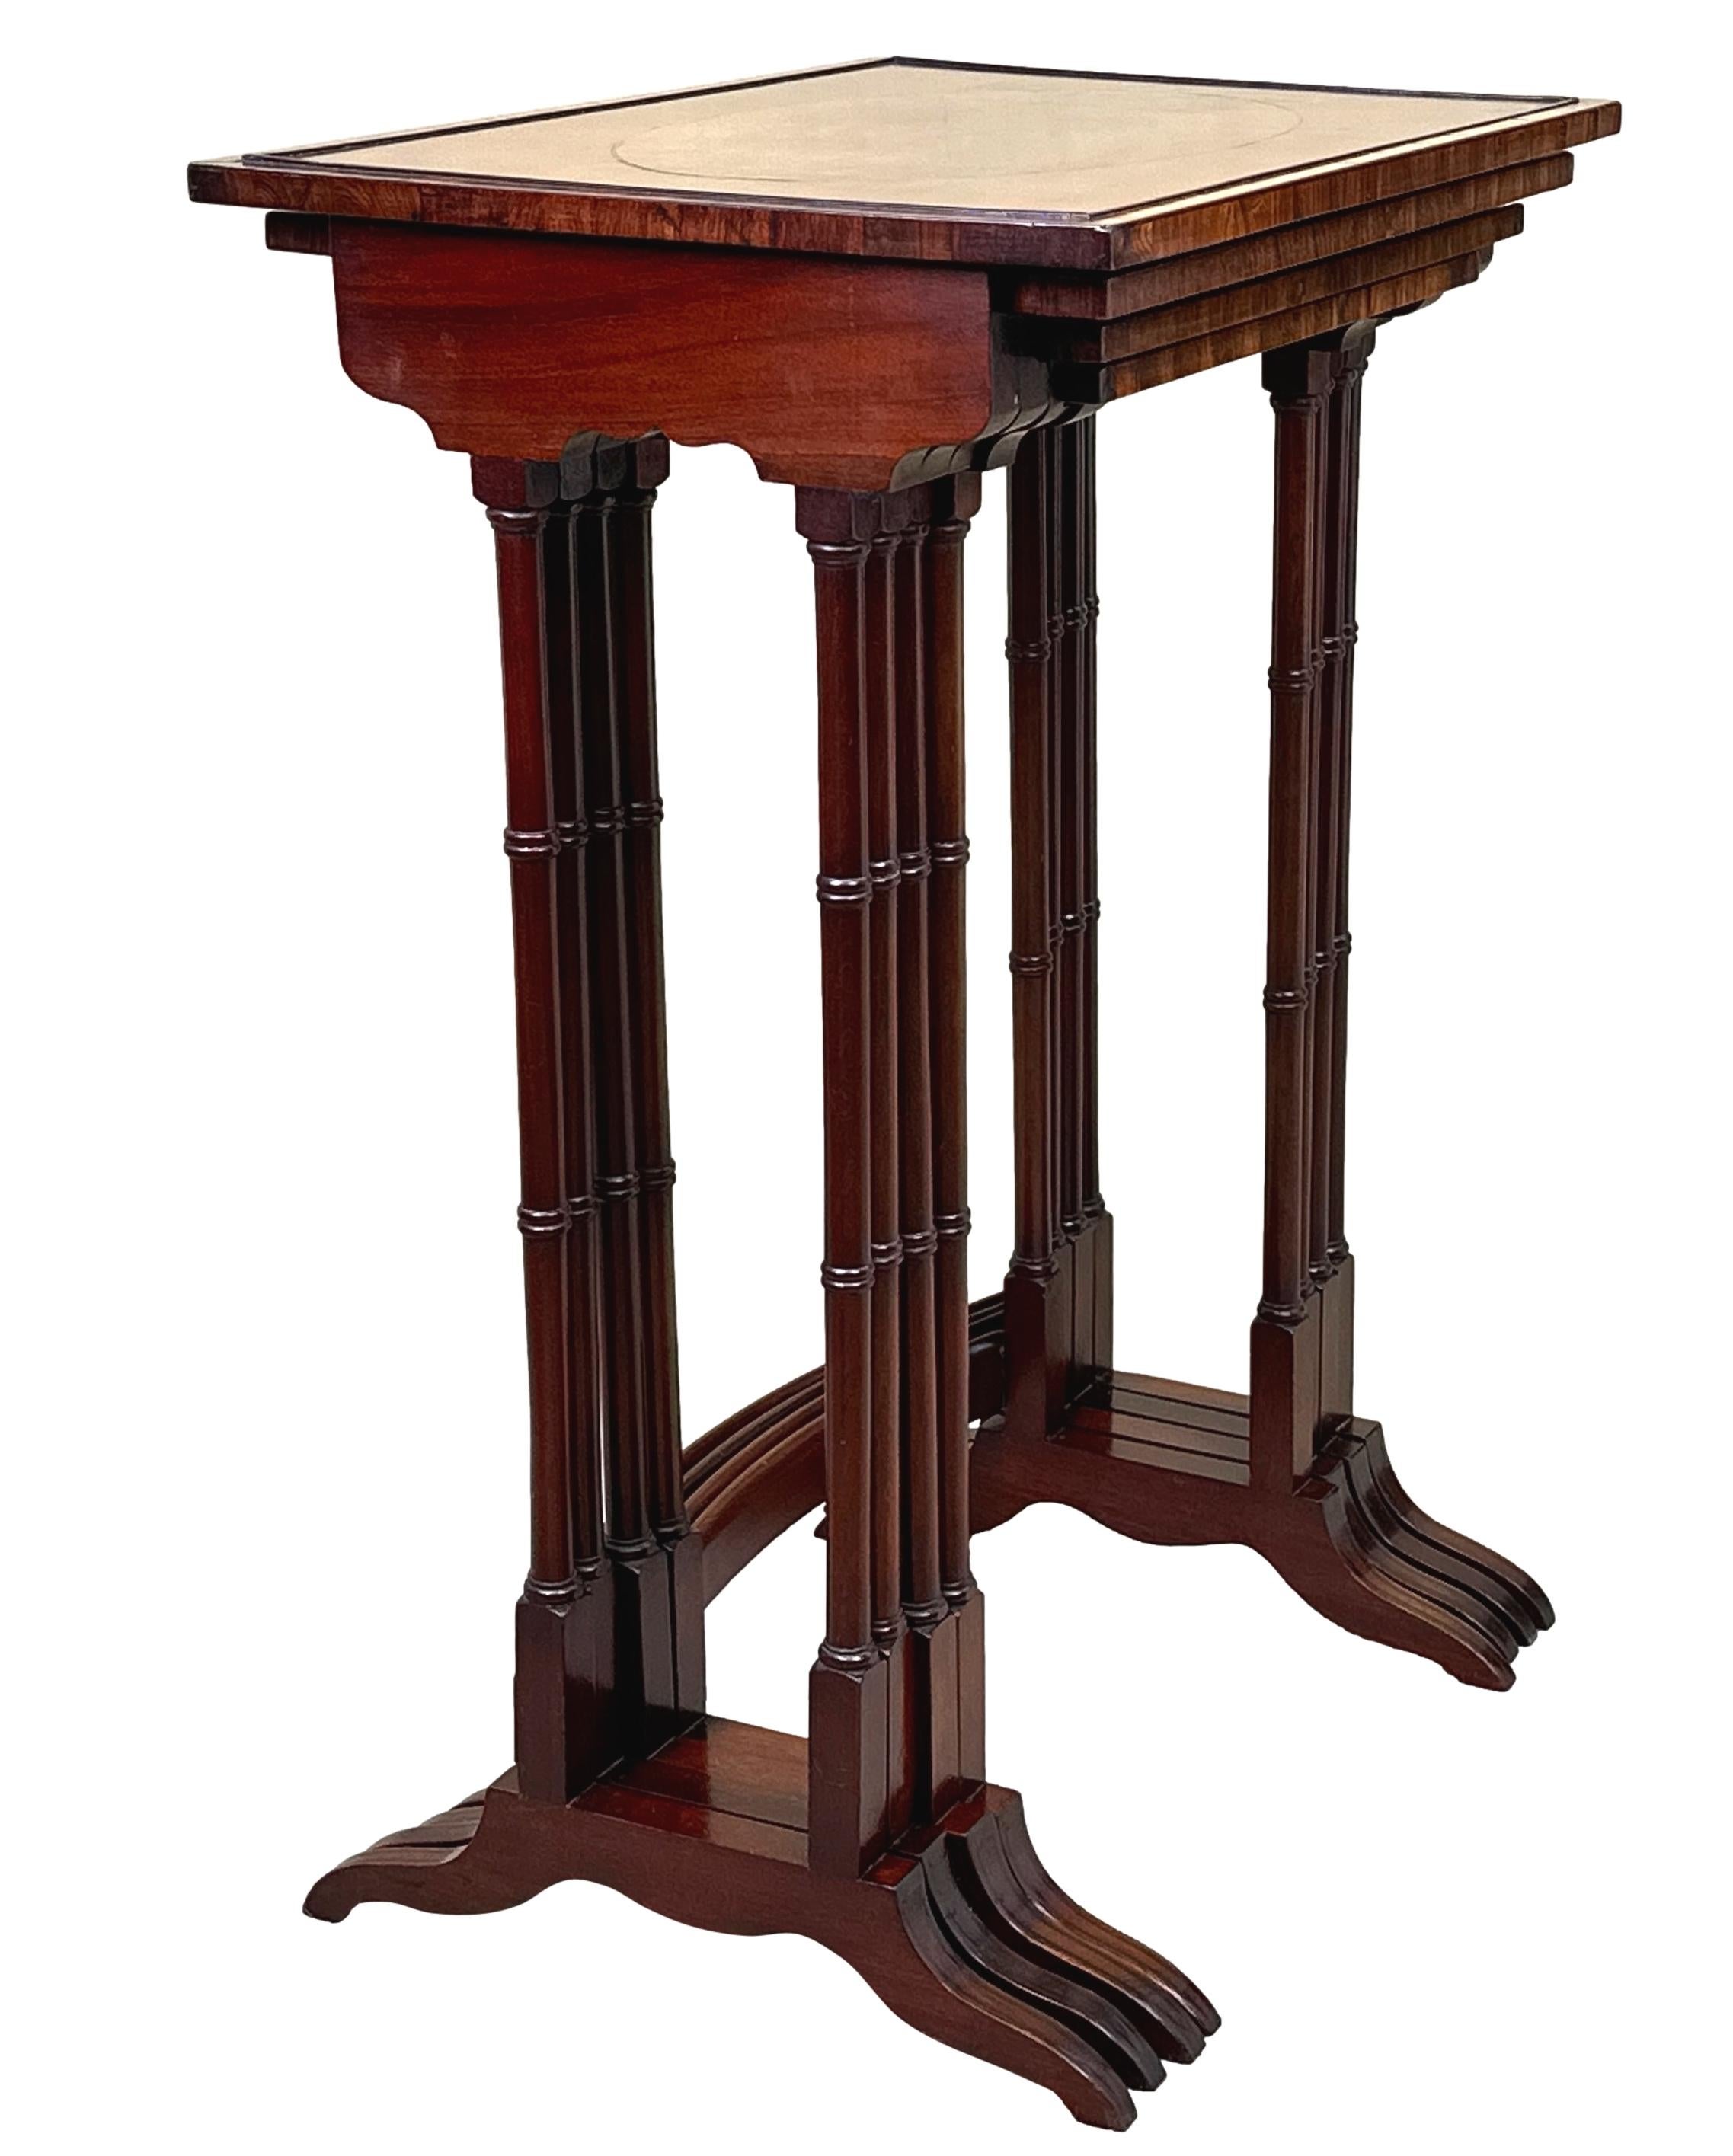 A Very Fine Quality Late 19th Century, Mahogany, Quartetto Nest Of Four Coffee Tables, Having Well Figured, Oval Inlaid, Tops With Cockbeaded Panelling And Attractive Crossbanded Edges, Raised On Elegant Turned Upright Supports United By Curved